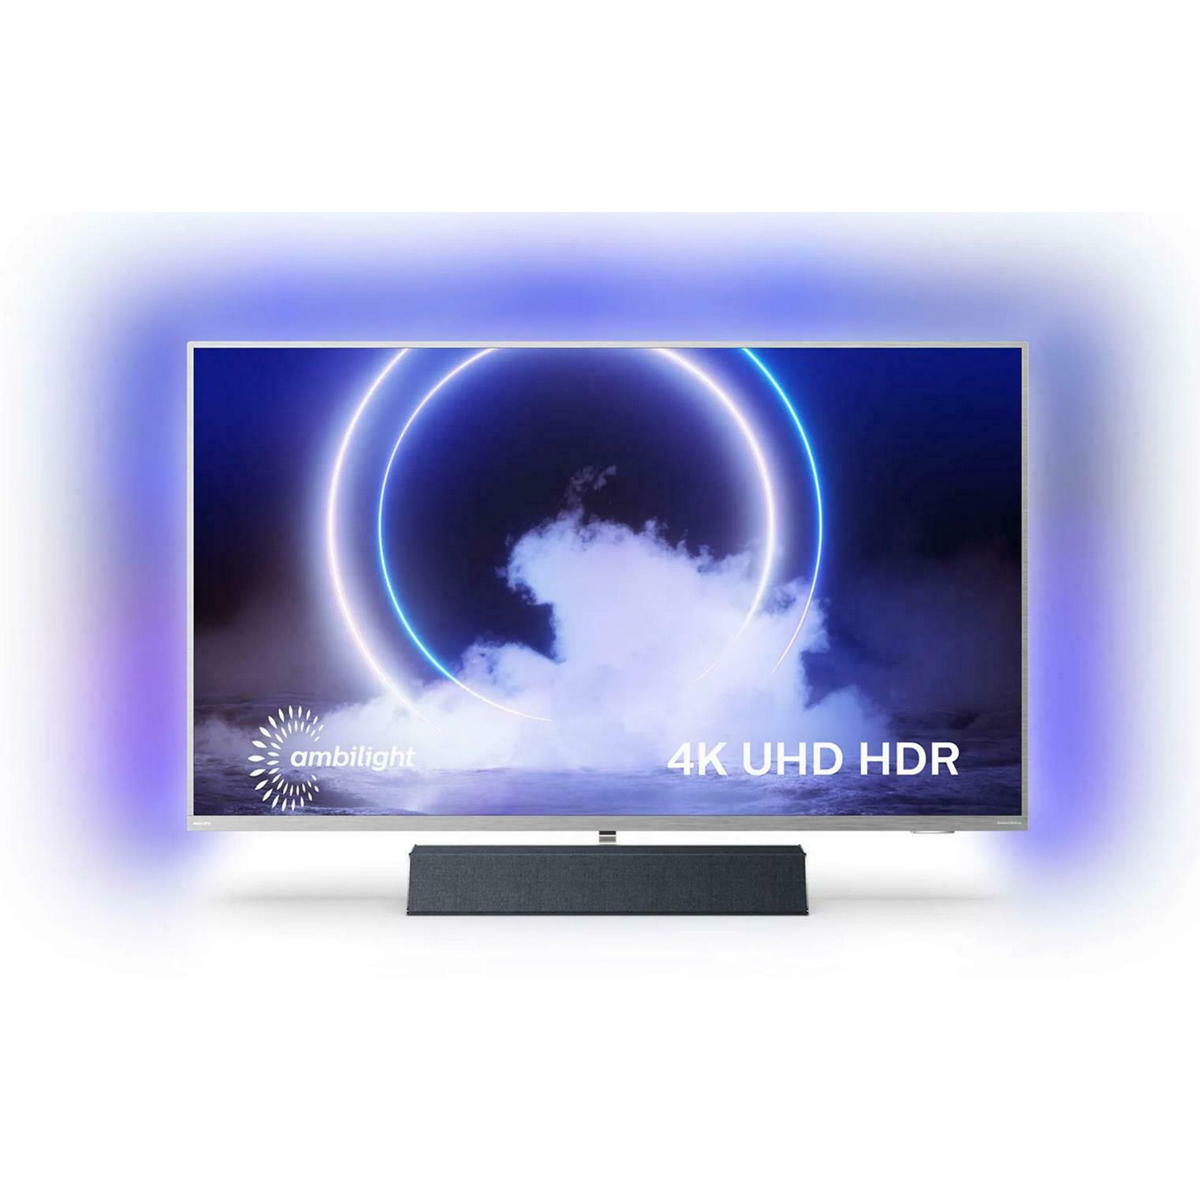 PHILIPS 43PUS9235/12 109,2 Ambilight, LED Zoll) (43 43 cm / 109,22 (Flat, TV™ Android (Pie)) Zoll TV 9 cm, UHD 4K